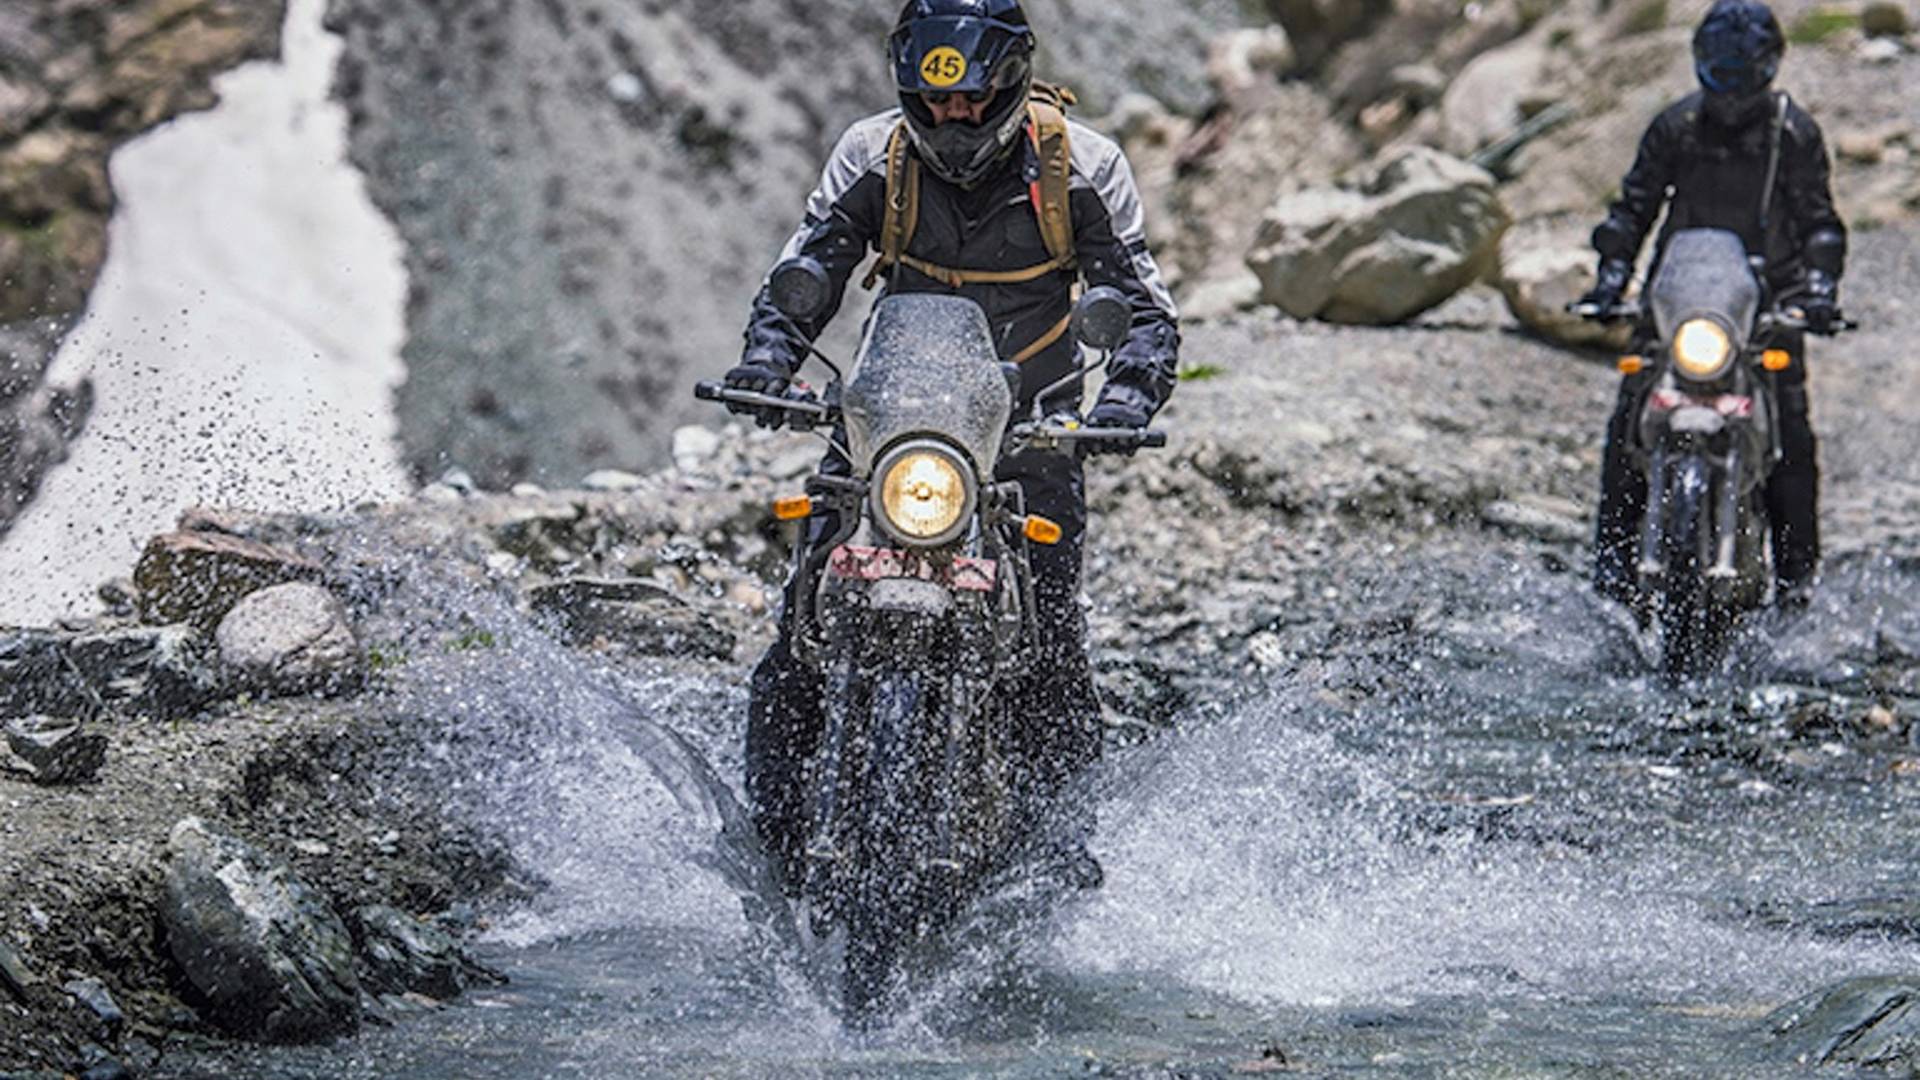 Royal Enfield Himalayan To Receive New Features For 2020